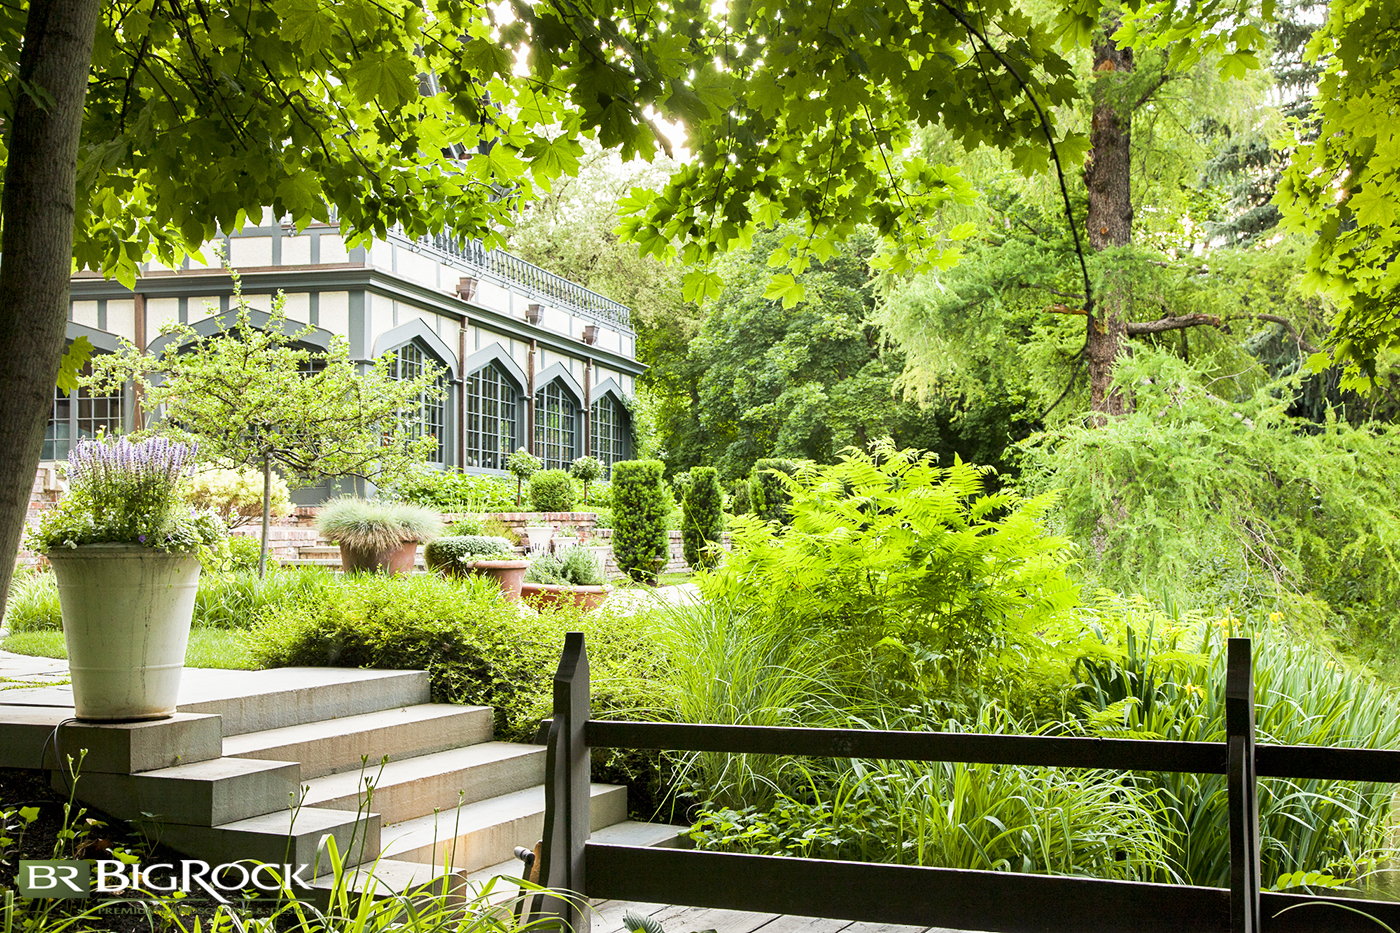 This garden design checklist will help you to create a beautiful space that you can enjoy for years to come.